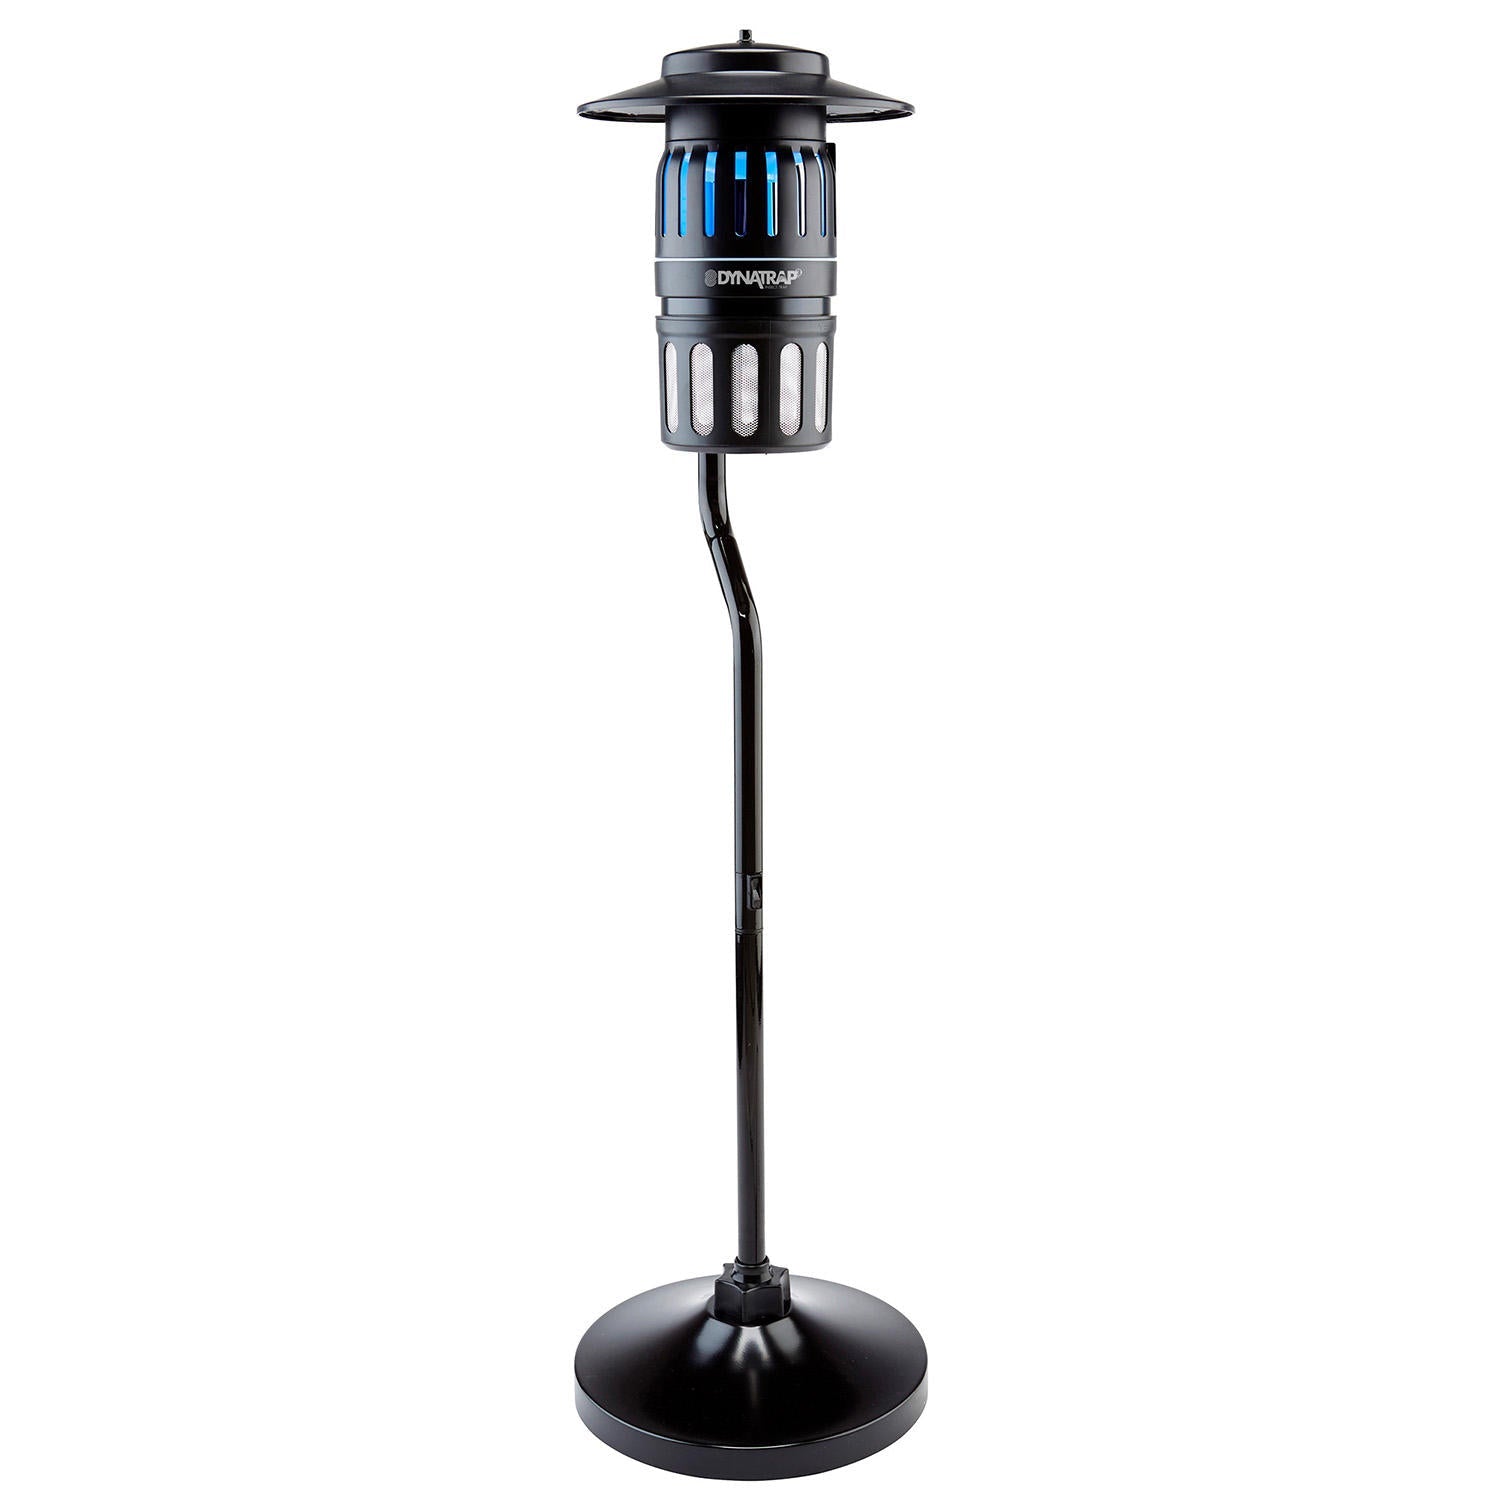 DynaTrap Insect Trap with Pole Mount - Bargainwizz